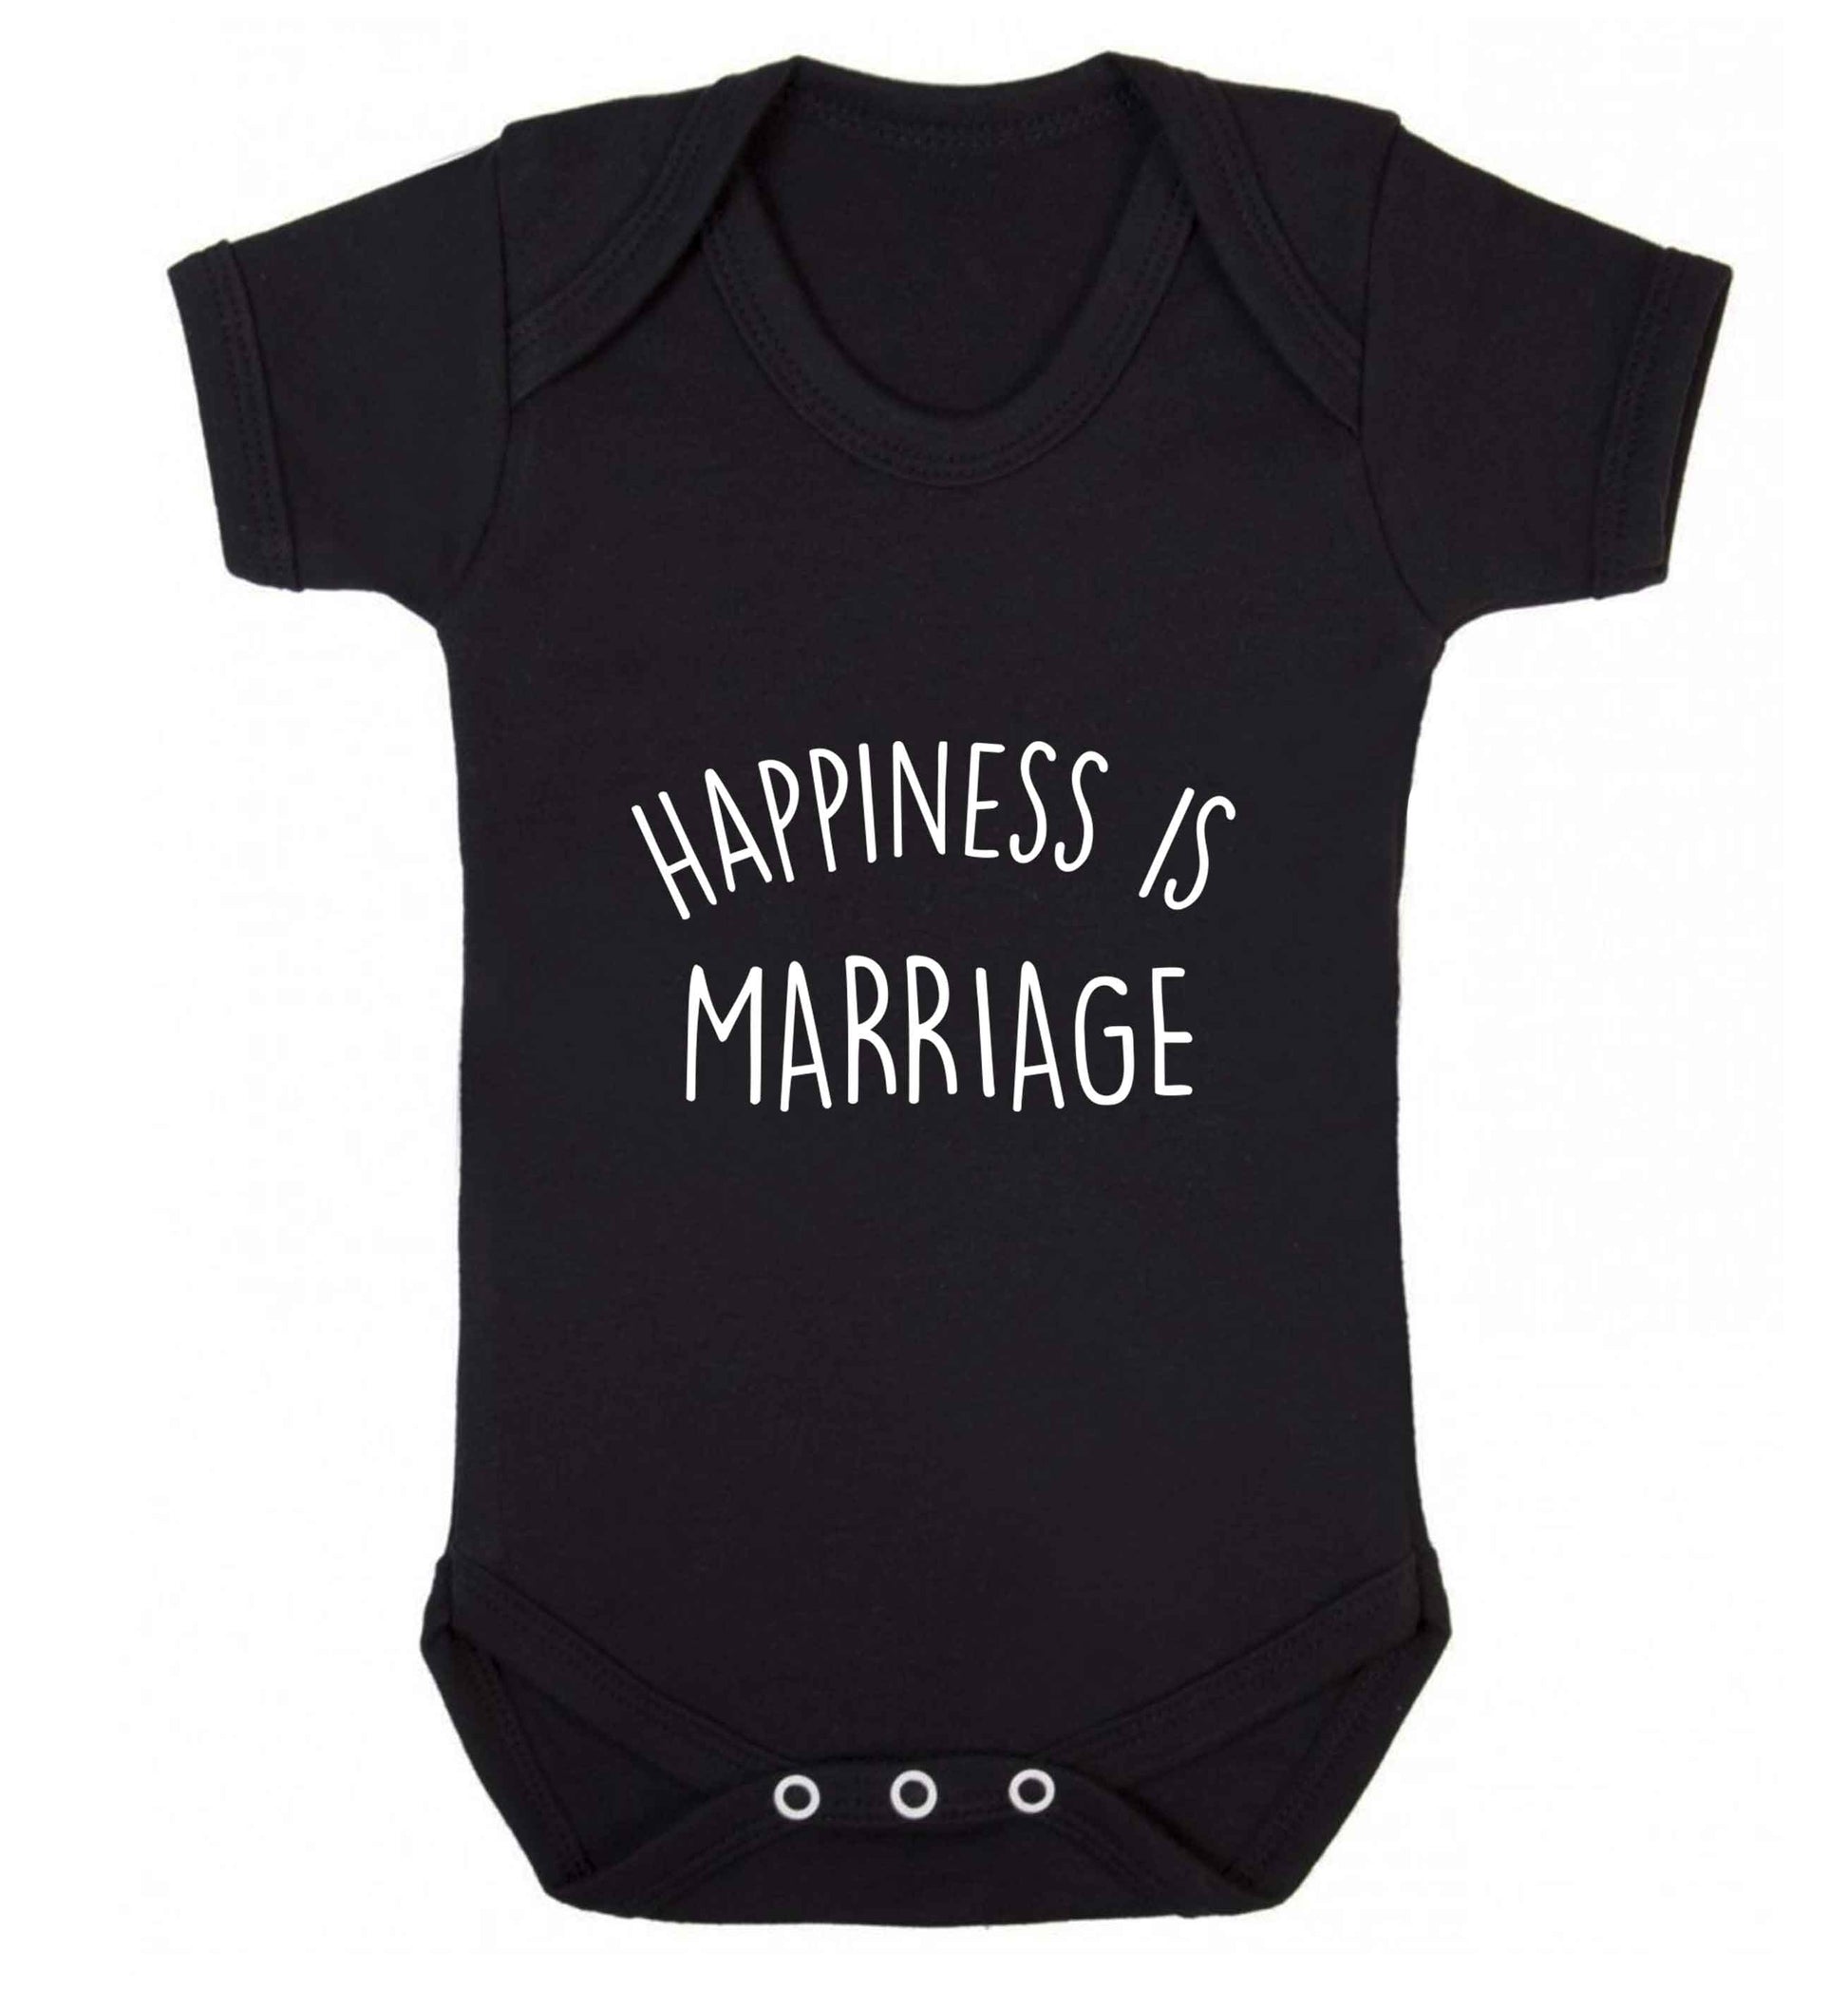 Happiness is marriage baby vest black 18-24 months